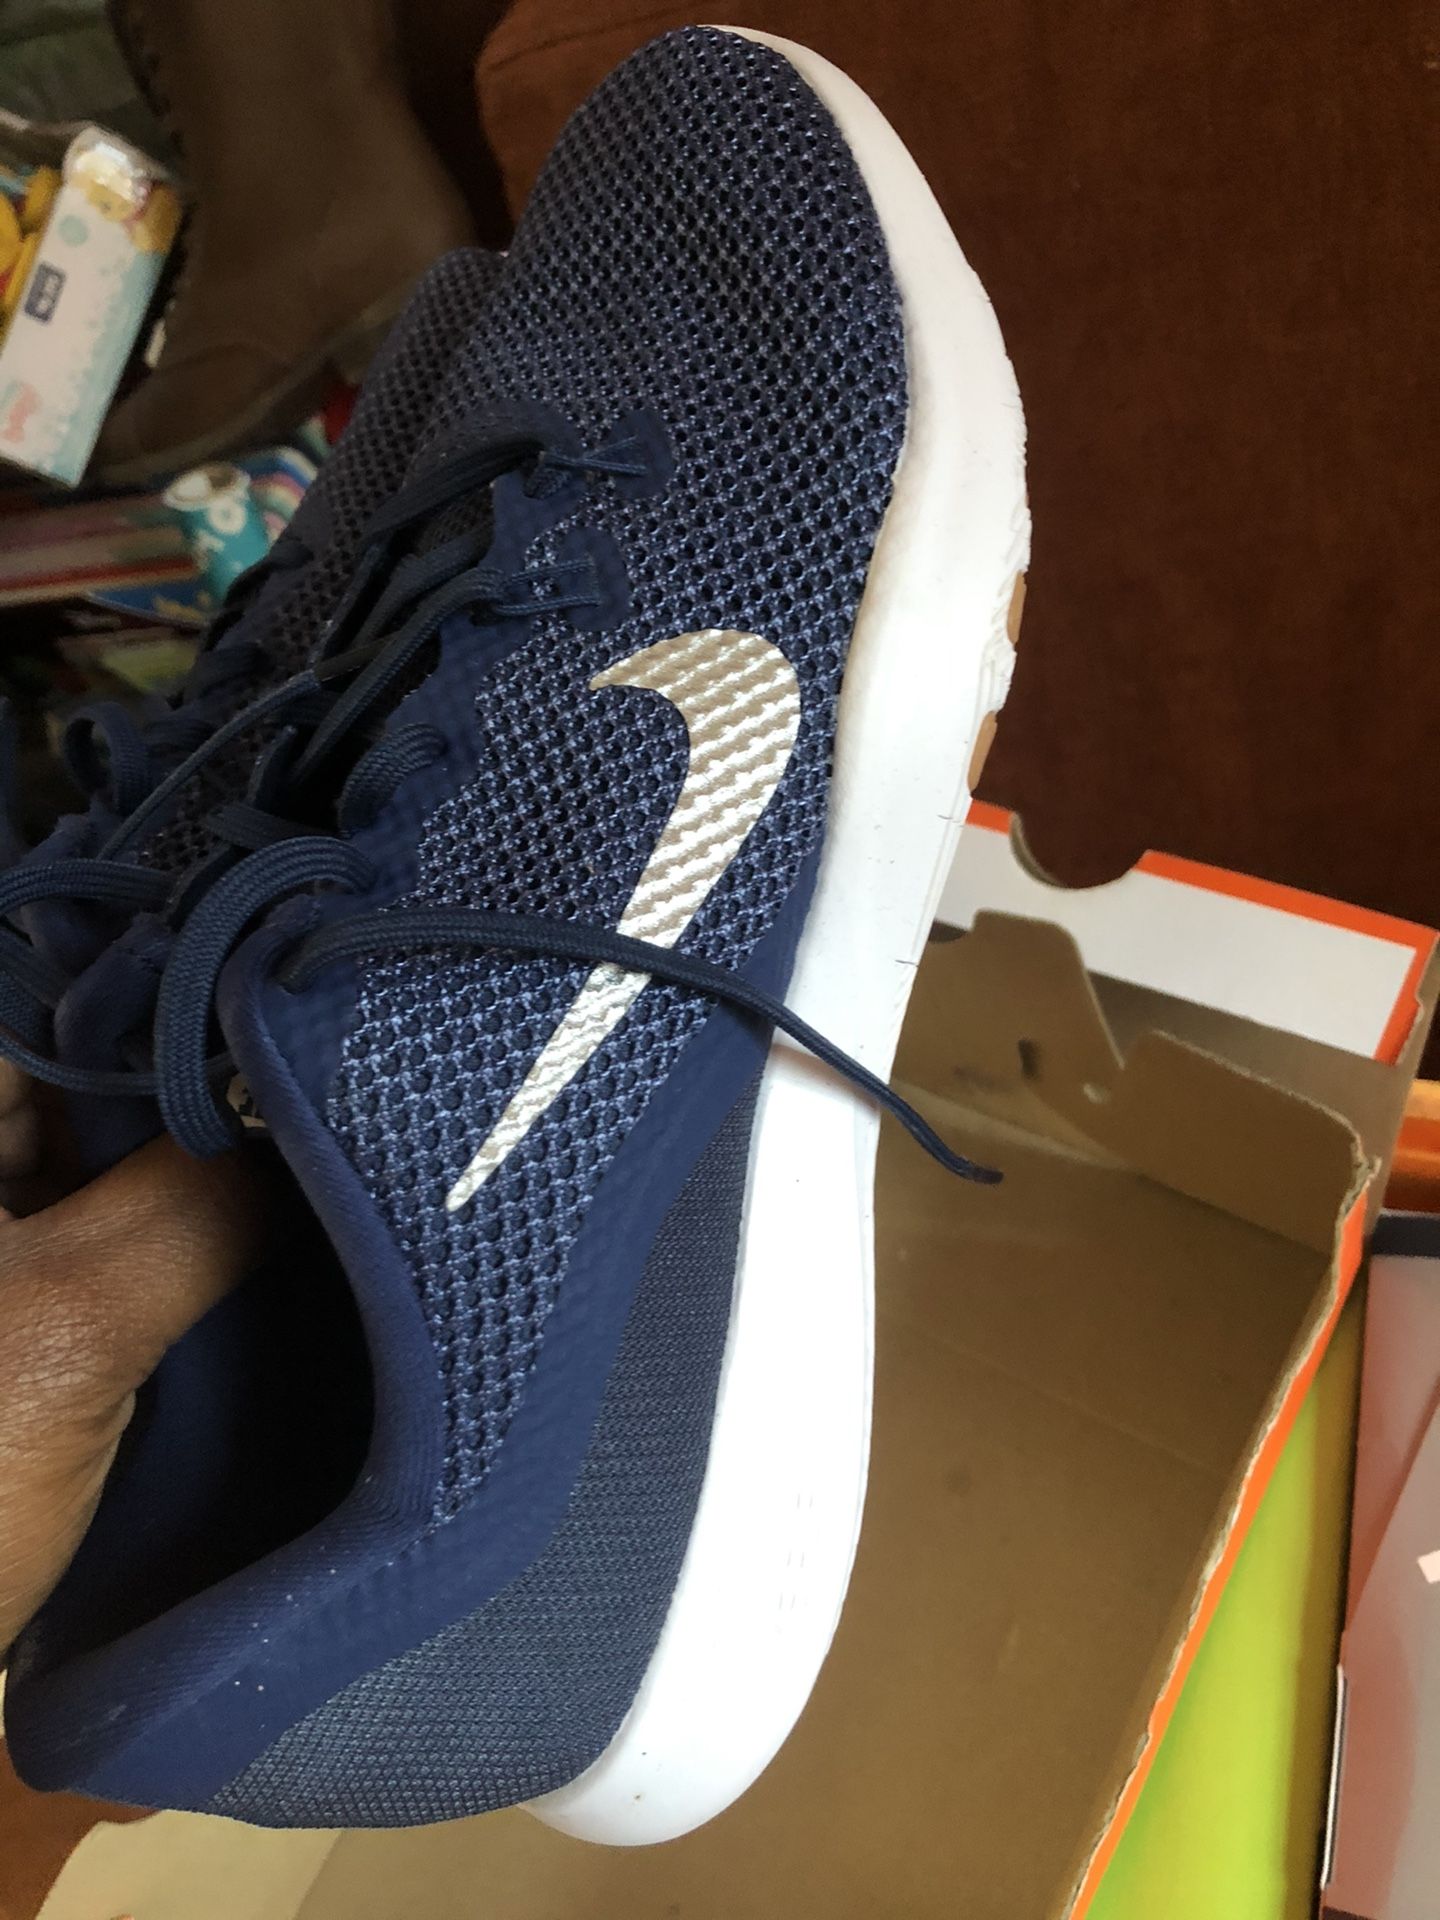 Nike tennis shoes navy blue size 9.5